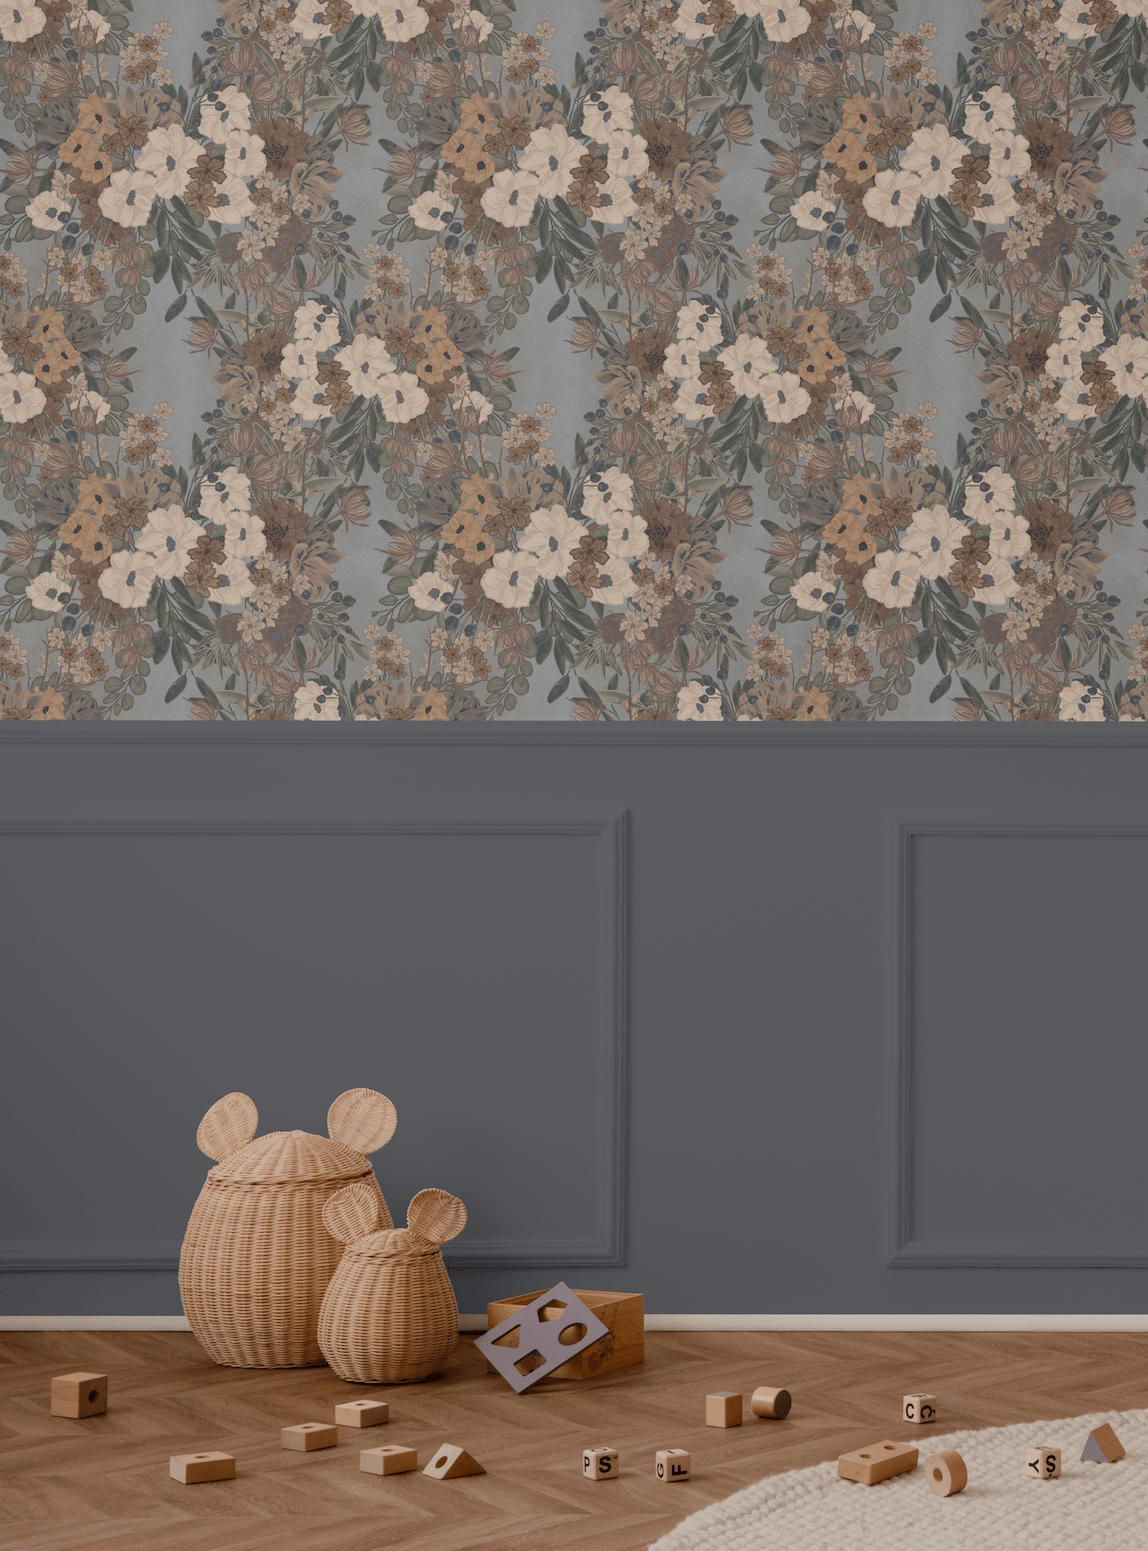 textured wallpaper by rocky mountain decals, peel and stick